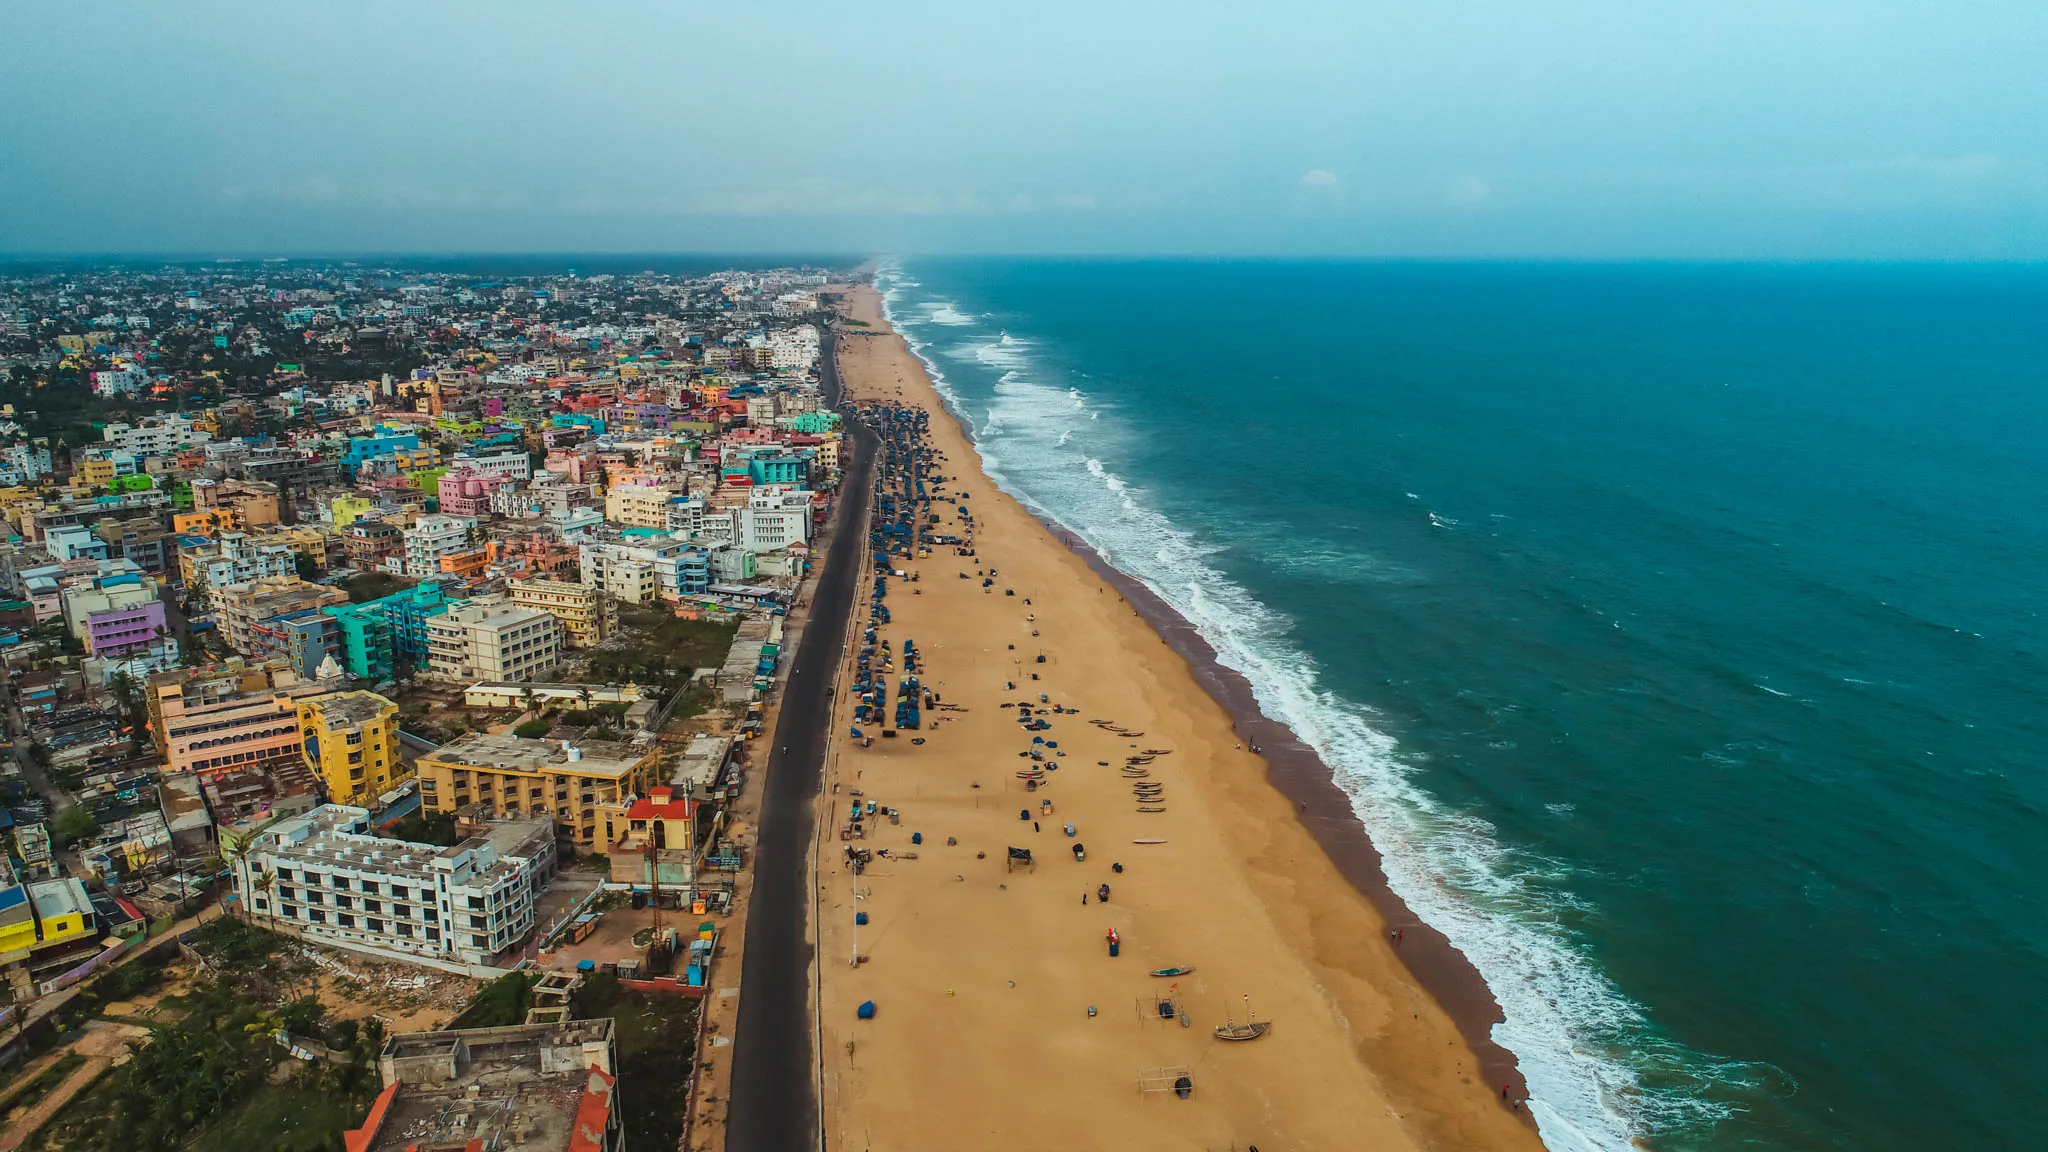 THINGS TO DO IN PURI